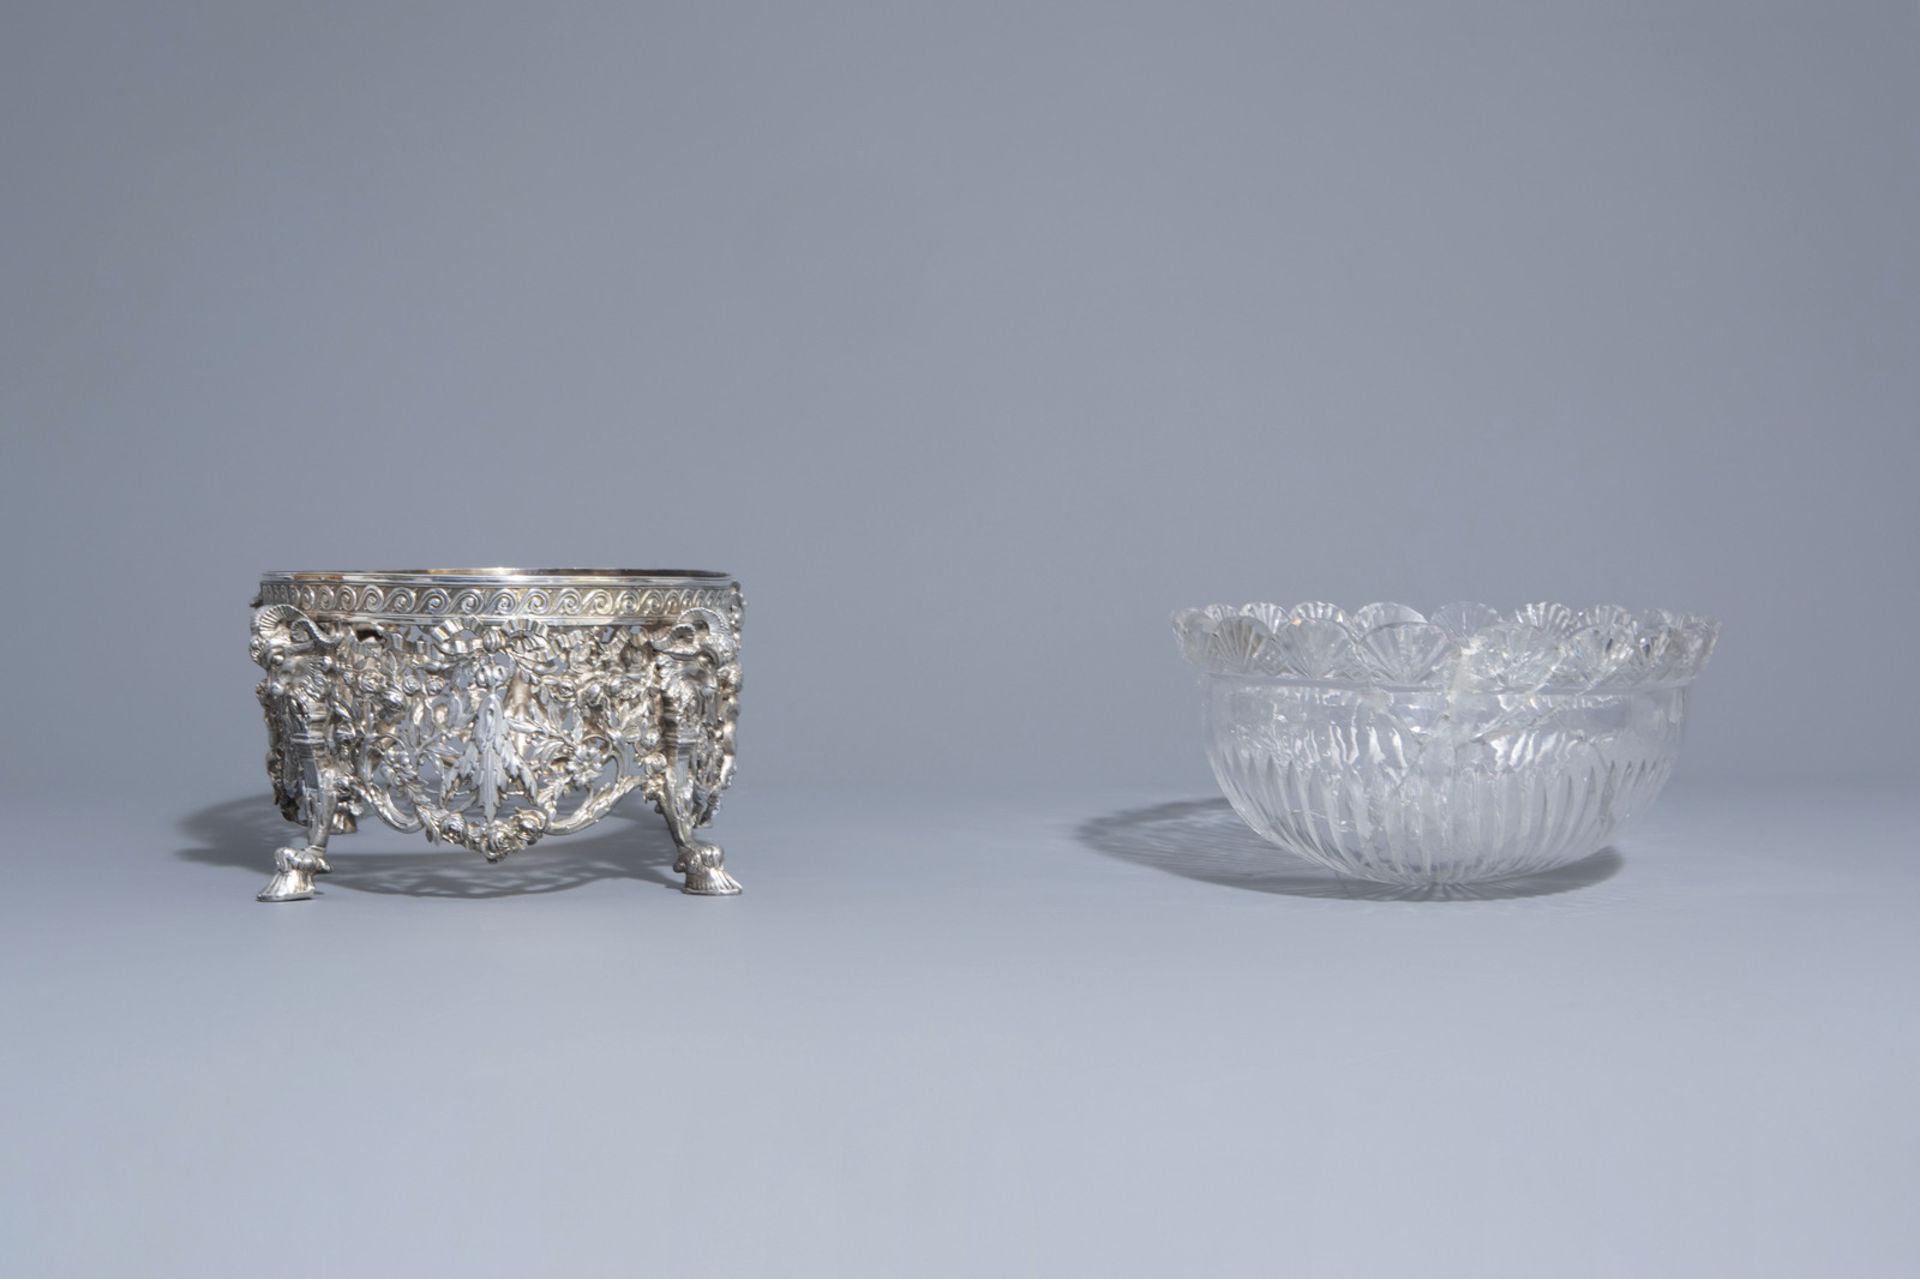 An imposing silver centerpiece with love theme and floral design with accompanying bowl, France, 19t - Image 5 of 10